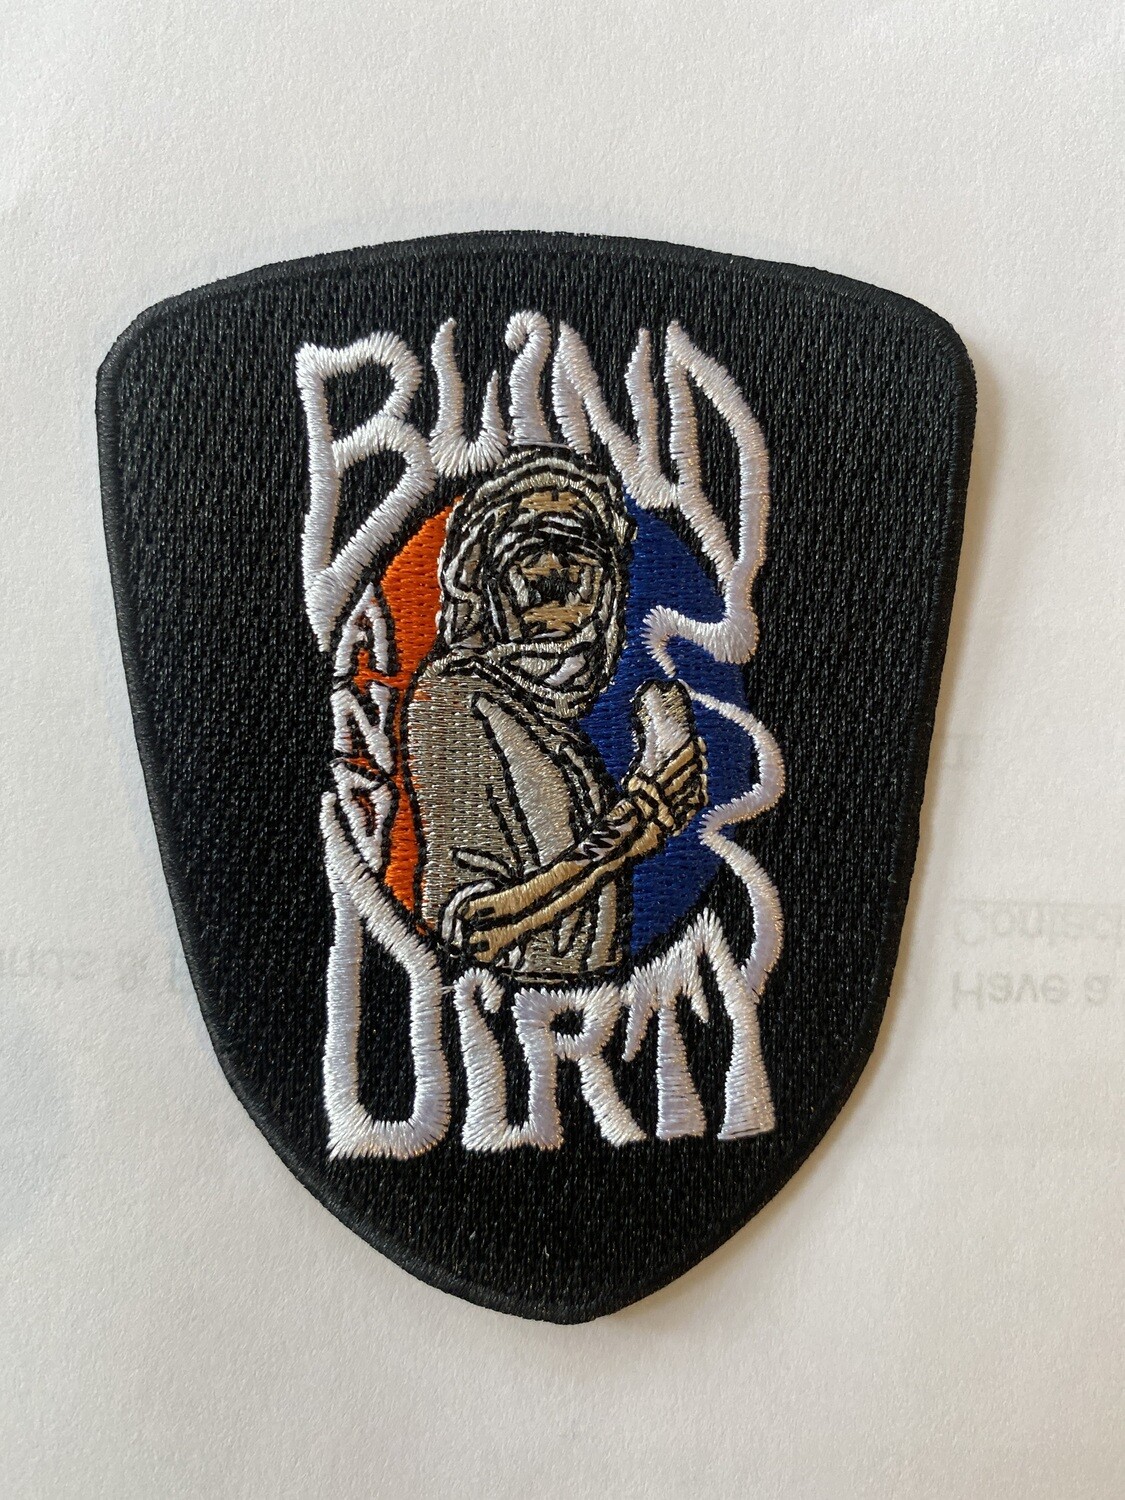 3” custom embroidered patch, iron-on backing